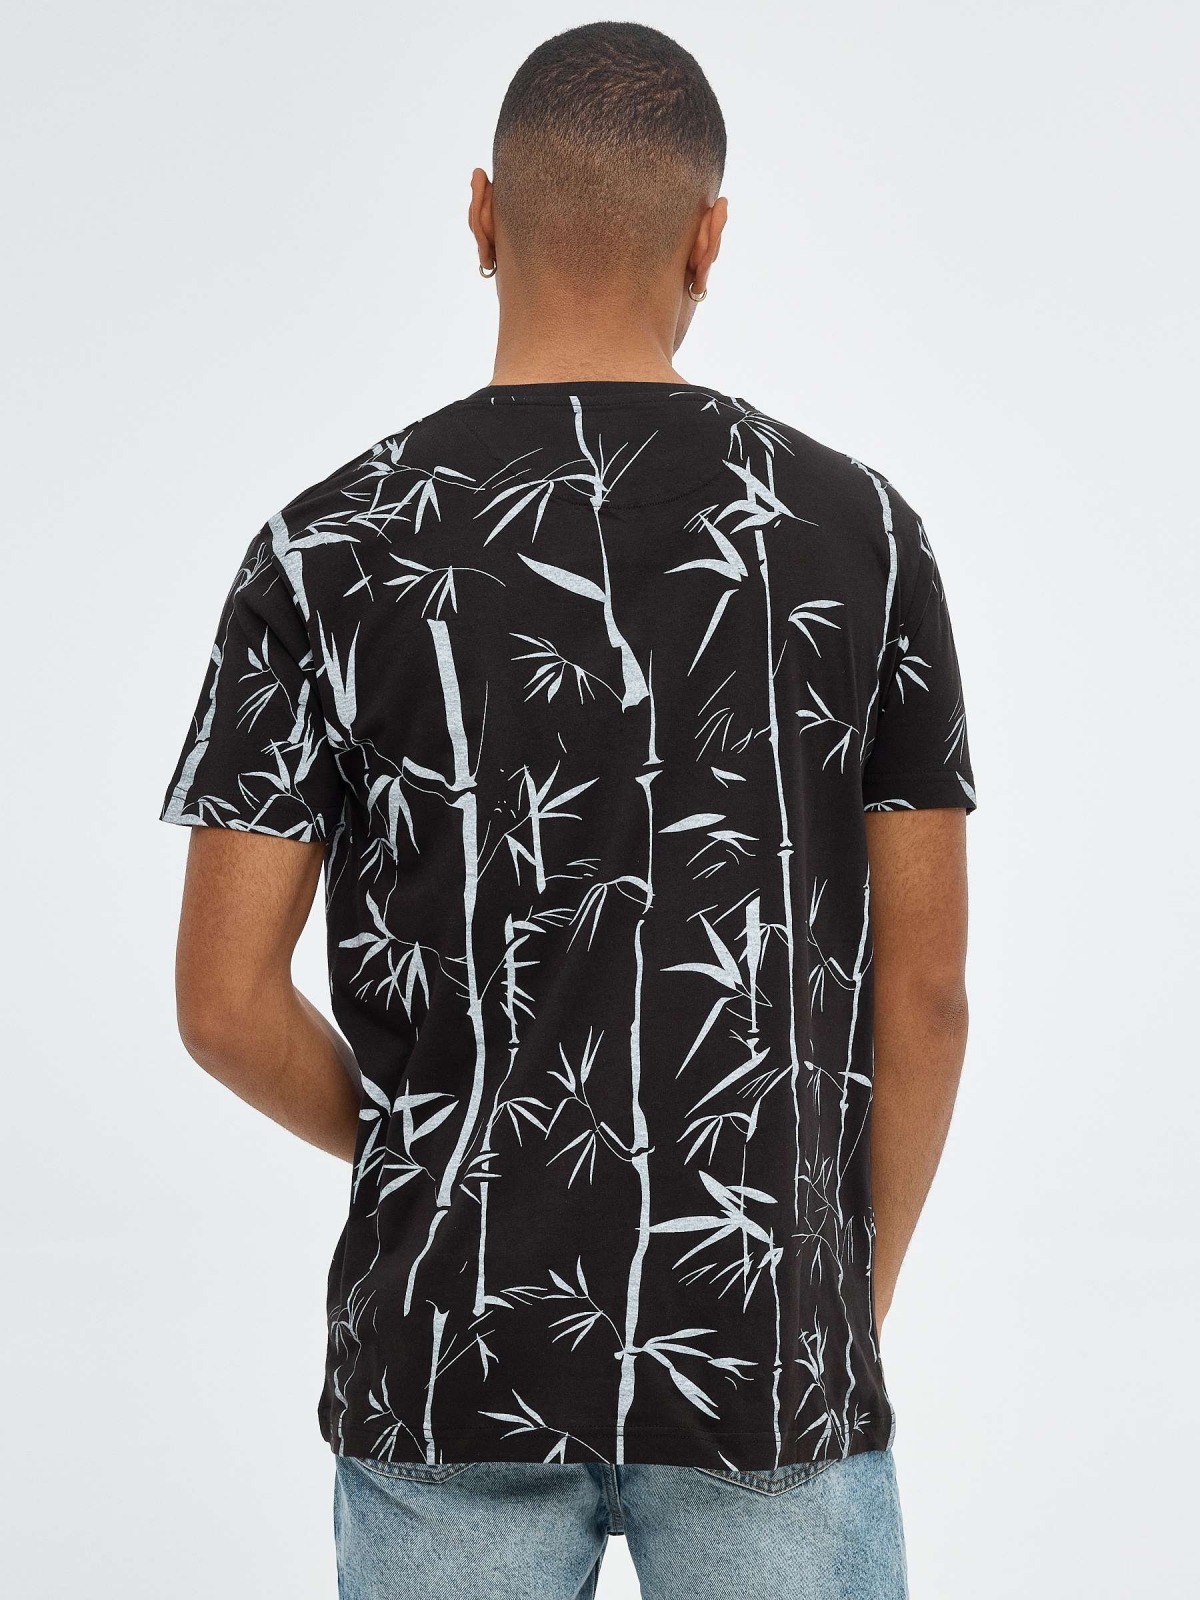 Bamboo print T-shirt black middle back view